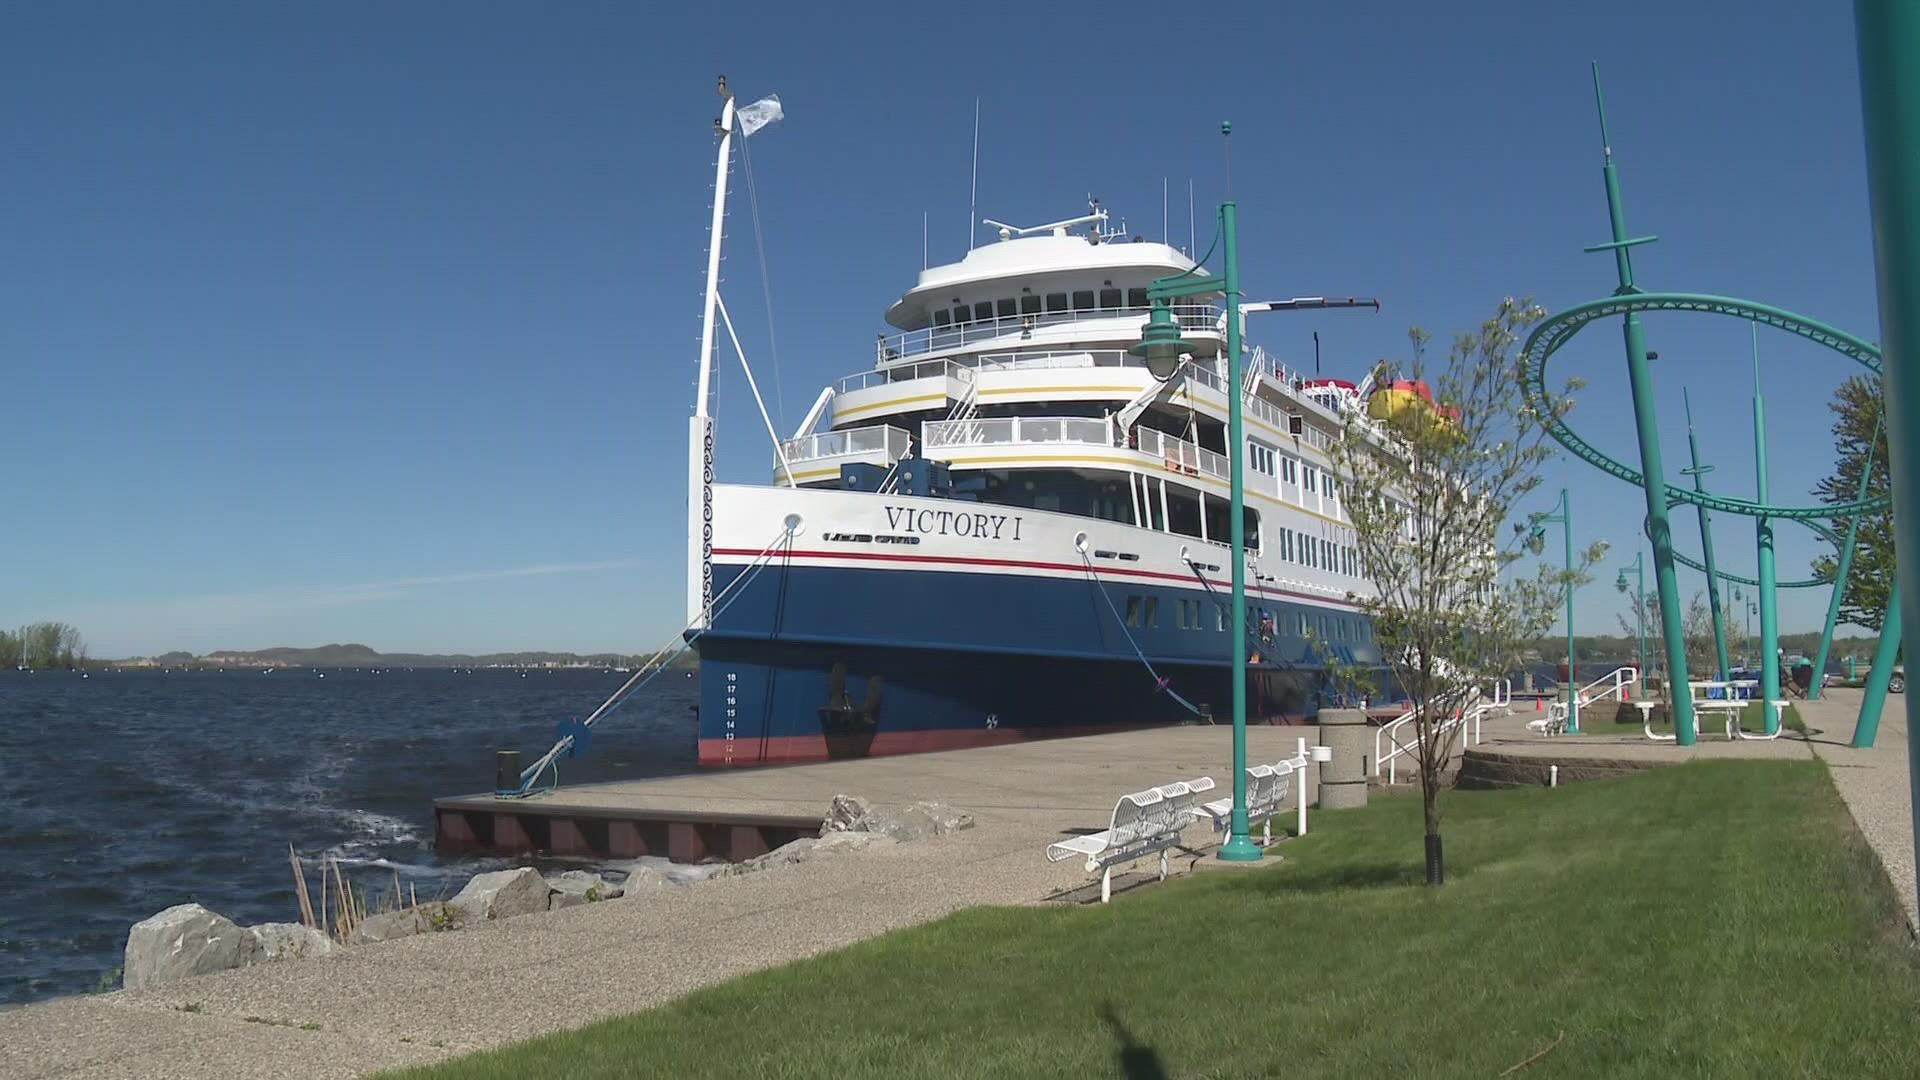 The Pearl Mist and Victory cruise lines are planning Muskegon stops in the summer of 2022. Other cruise lines are also considering stops.